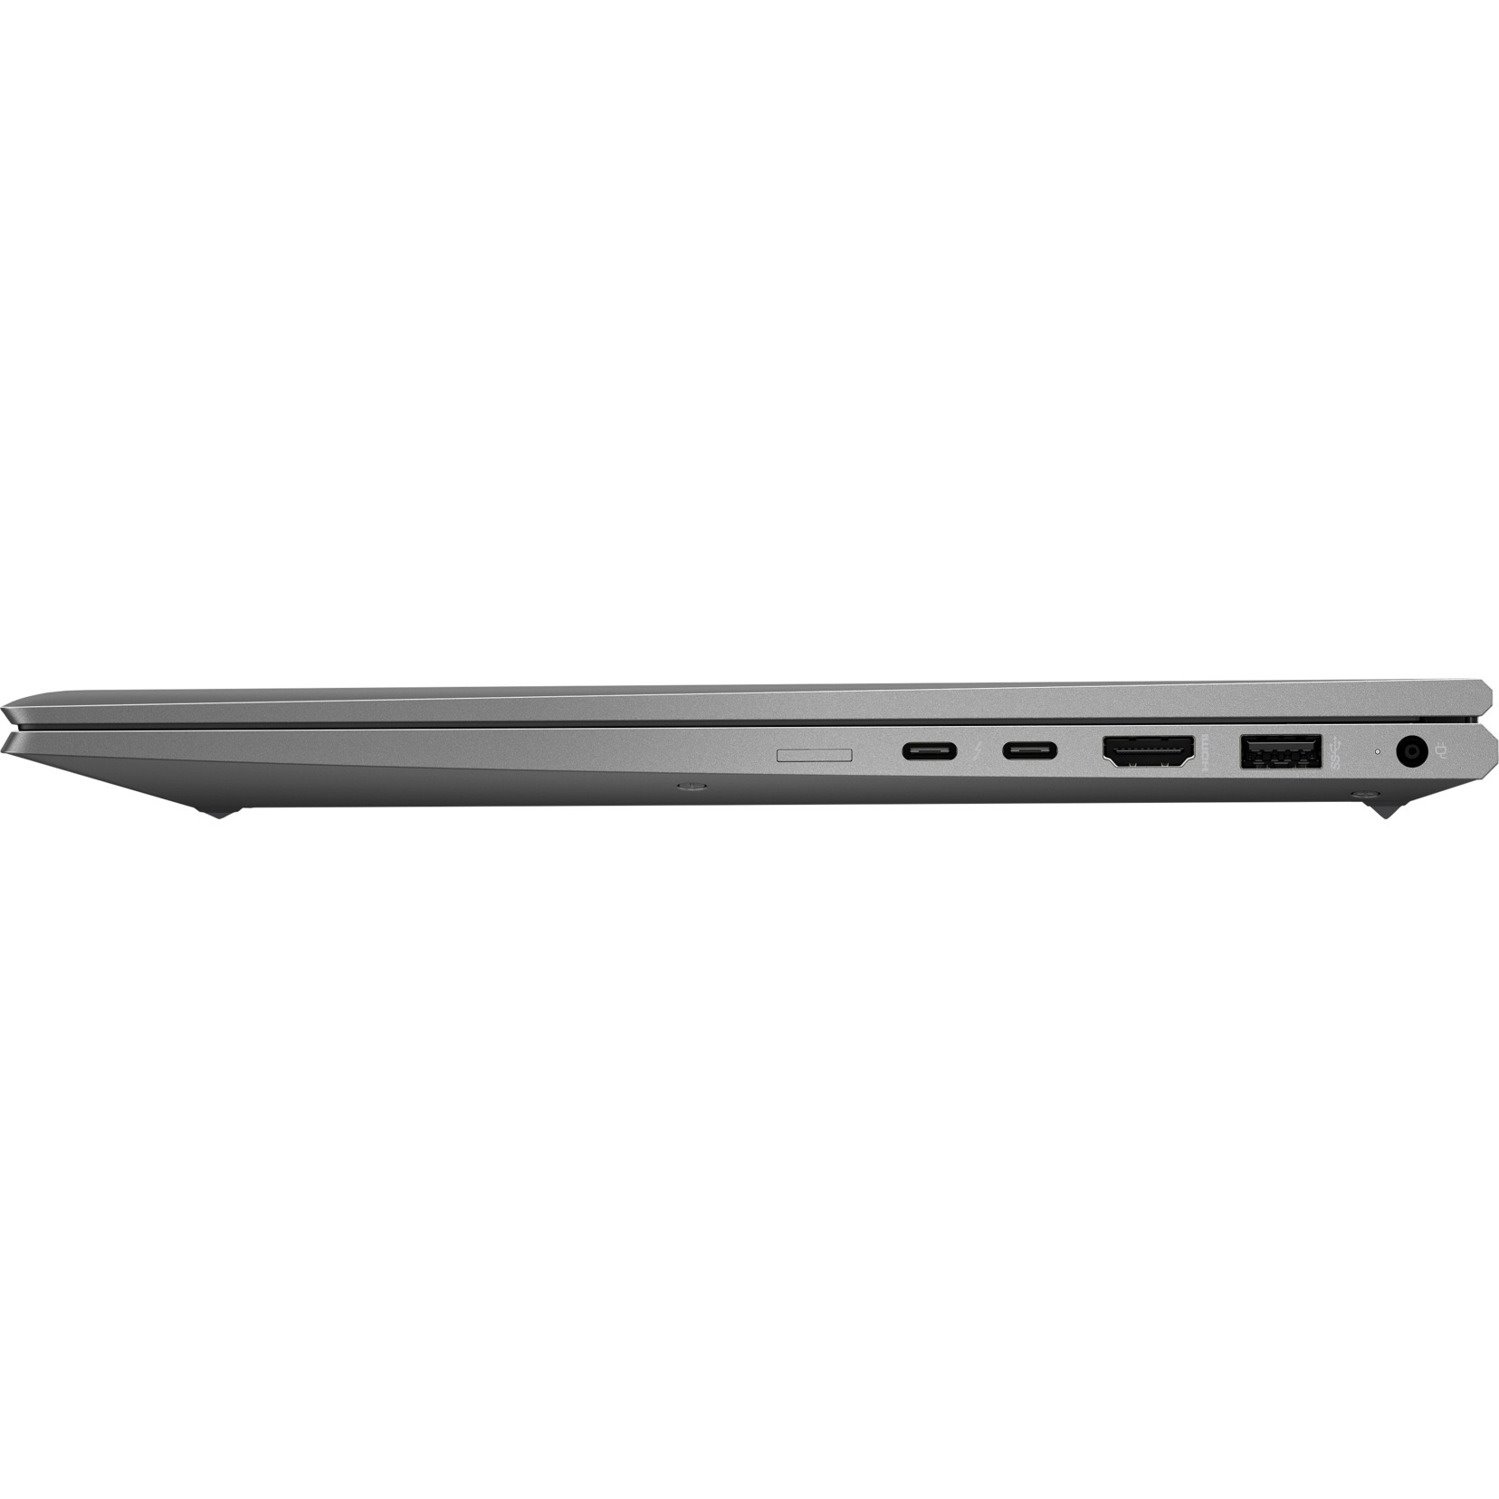 HP ZBook Firefly 15 G8 LTE 15.6" Touchscreen Mobile Workstation - Full HD - 1920 x 1080 - Intel Core i7 11th Gen i7-1185G7 Quad-core (4 Core) - 32 GB Total RAM - 512 GB SSD